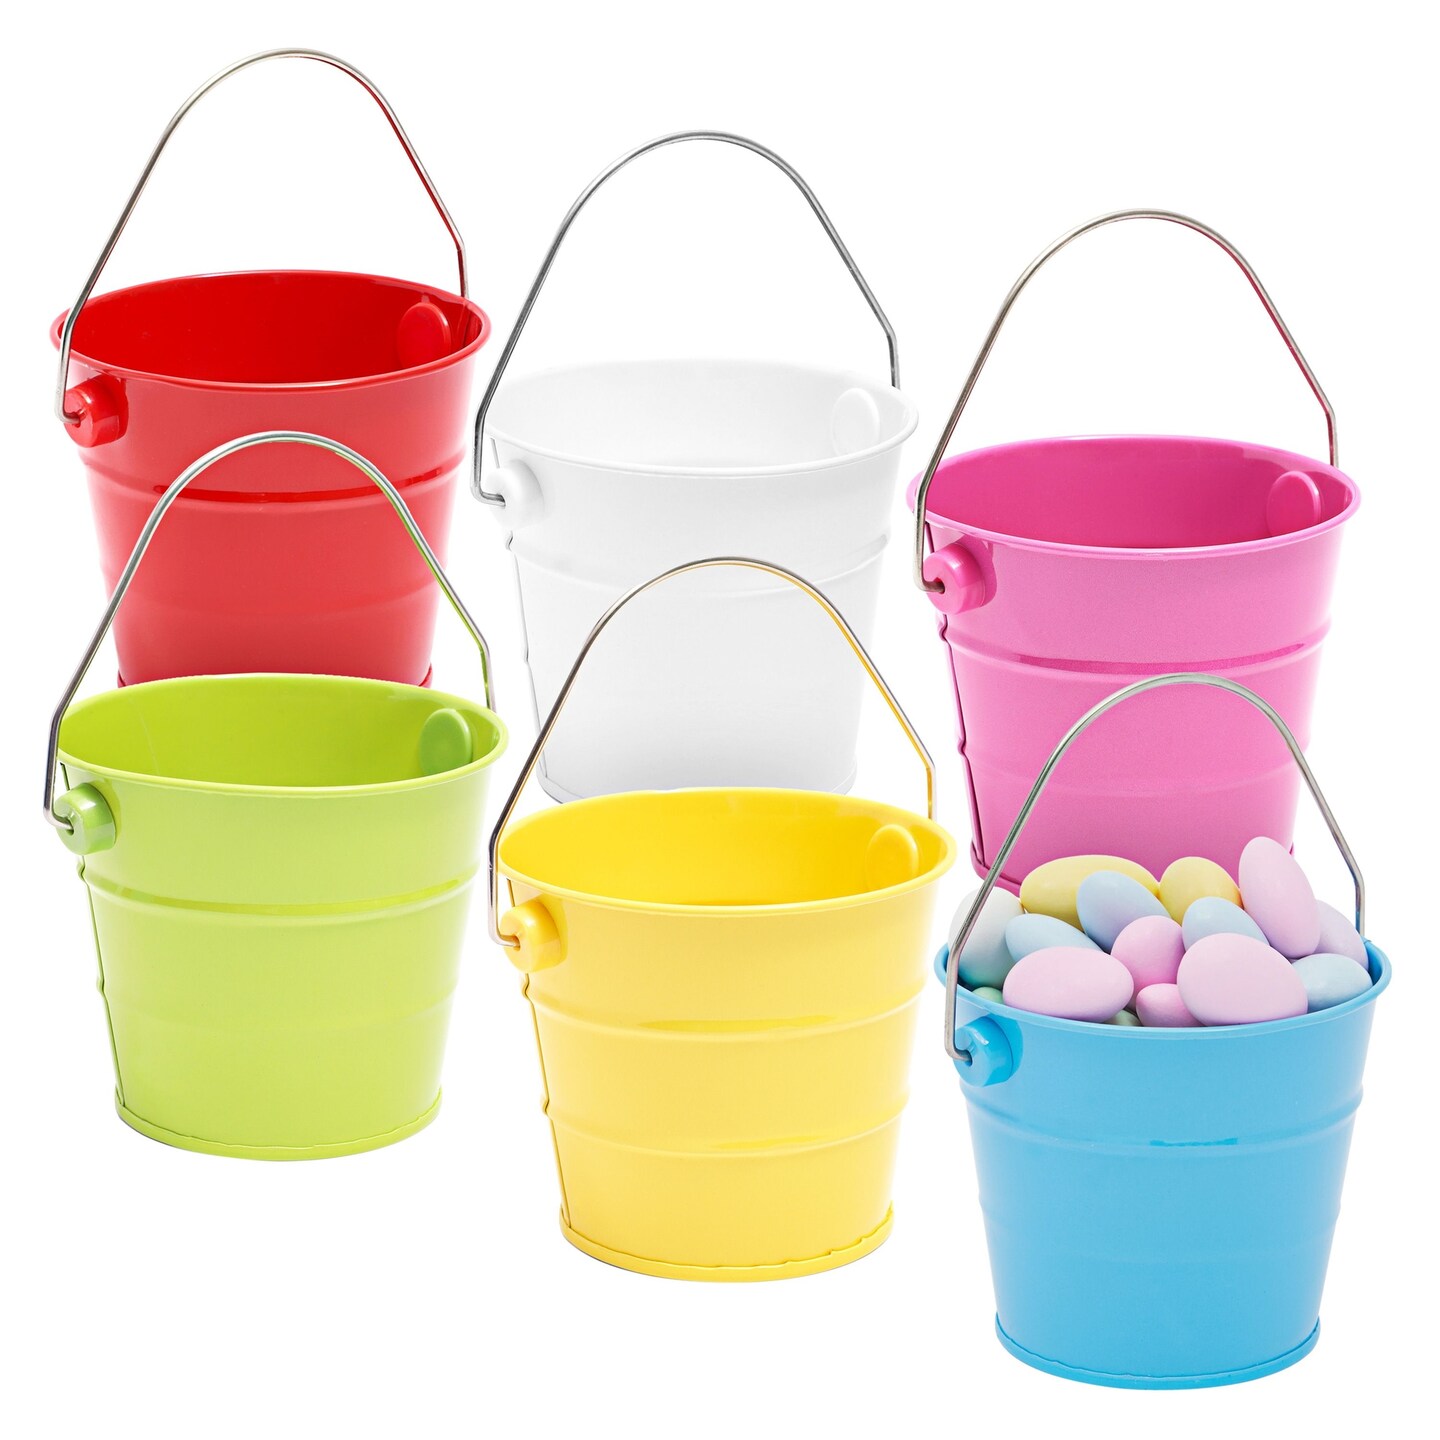 Mini Metal Buckets, Pails with Handles for Party Favors, Easter (6-pack)